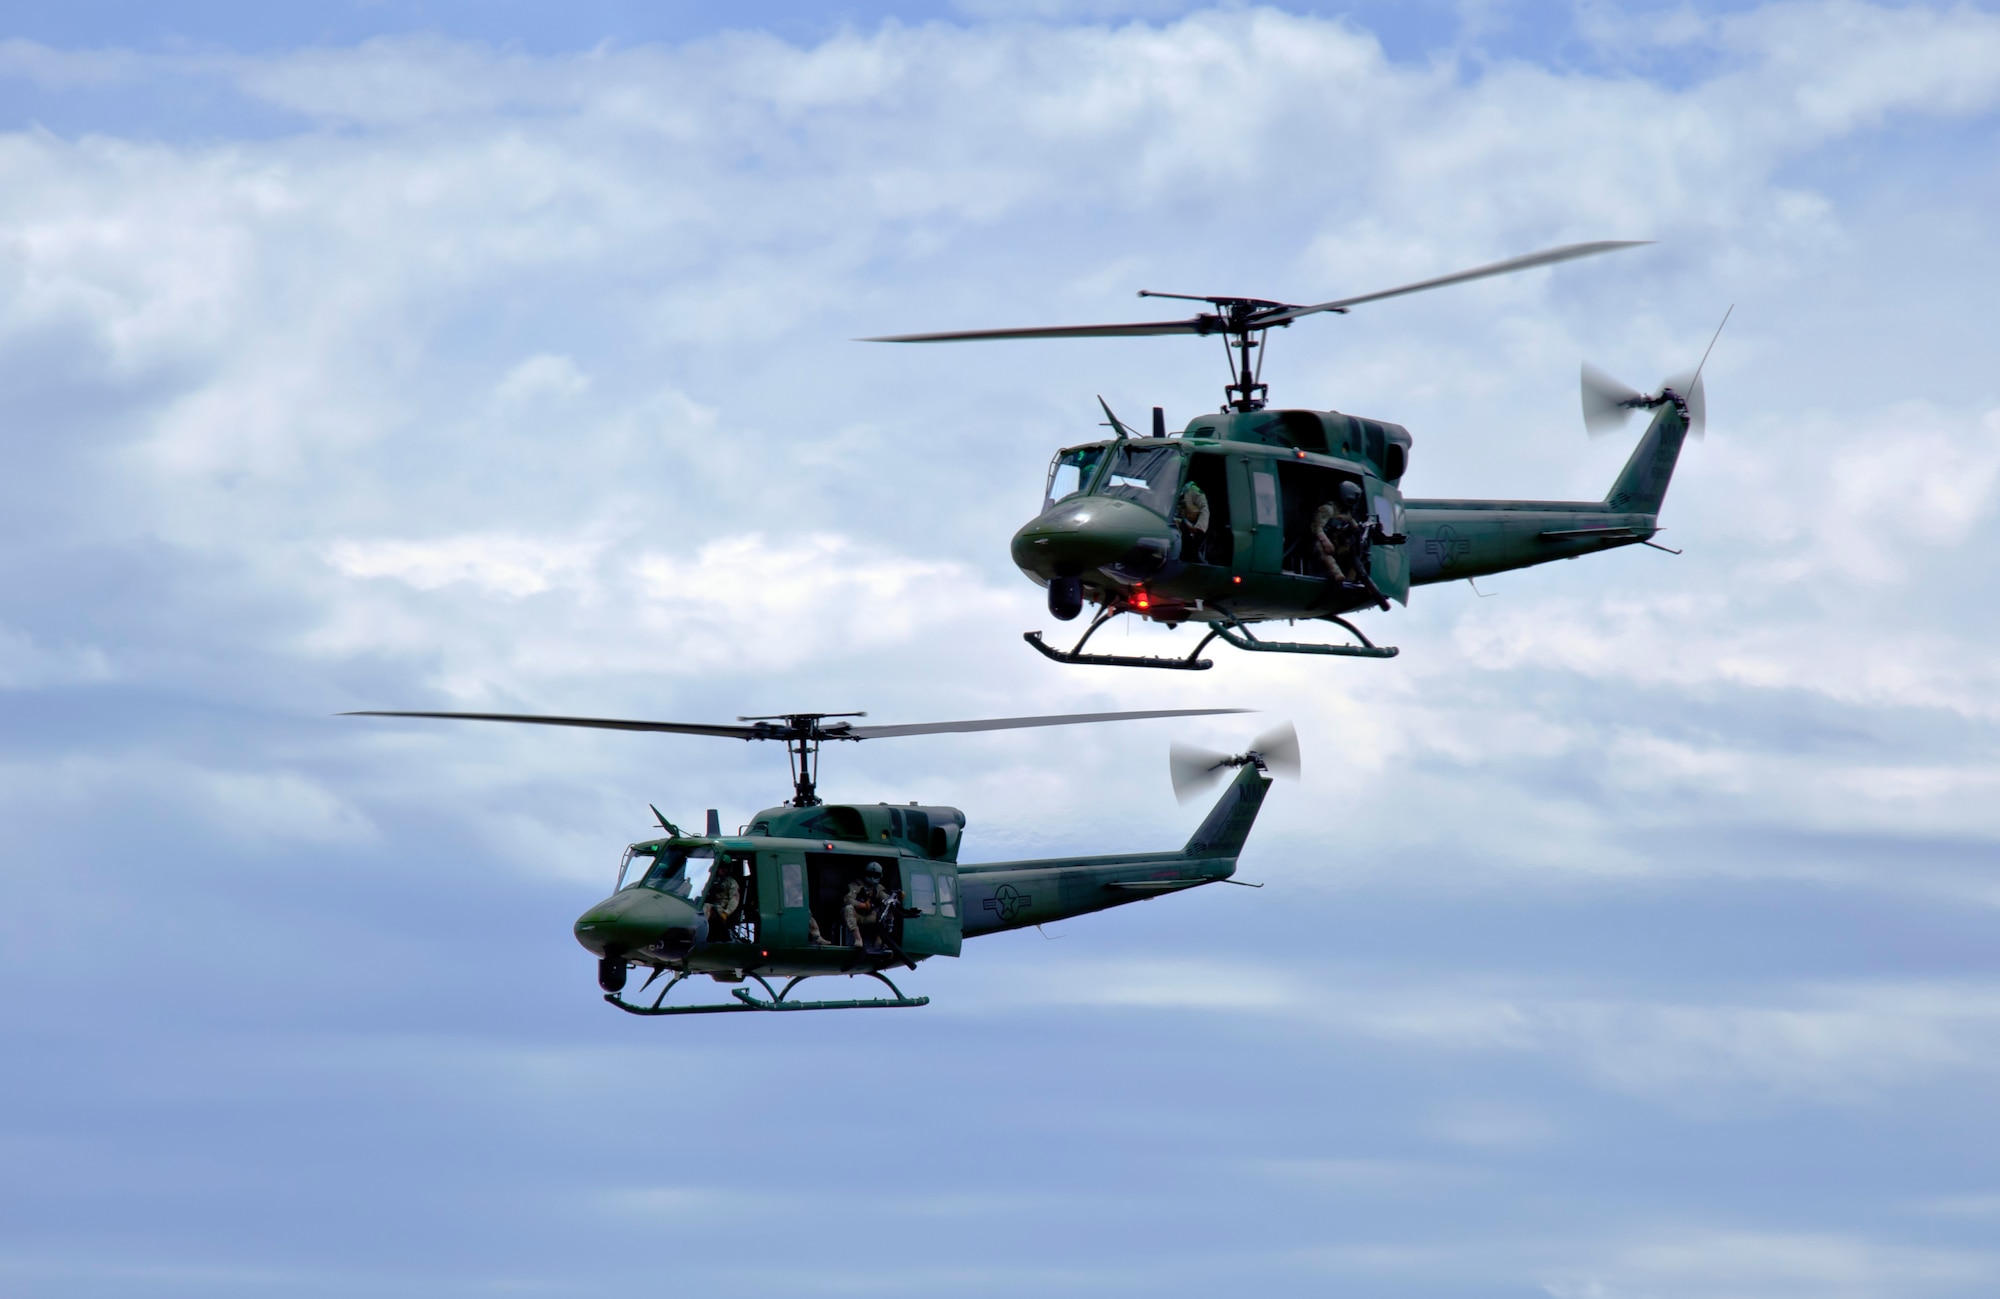 UH-1N helicopters with the 40th Helicopter Squadron performs flight maneuvers July 13, 2019, at the “Mission Over Malmstrom” open house event on Malmstrom Air Force Base, Mont.